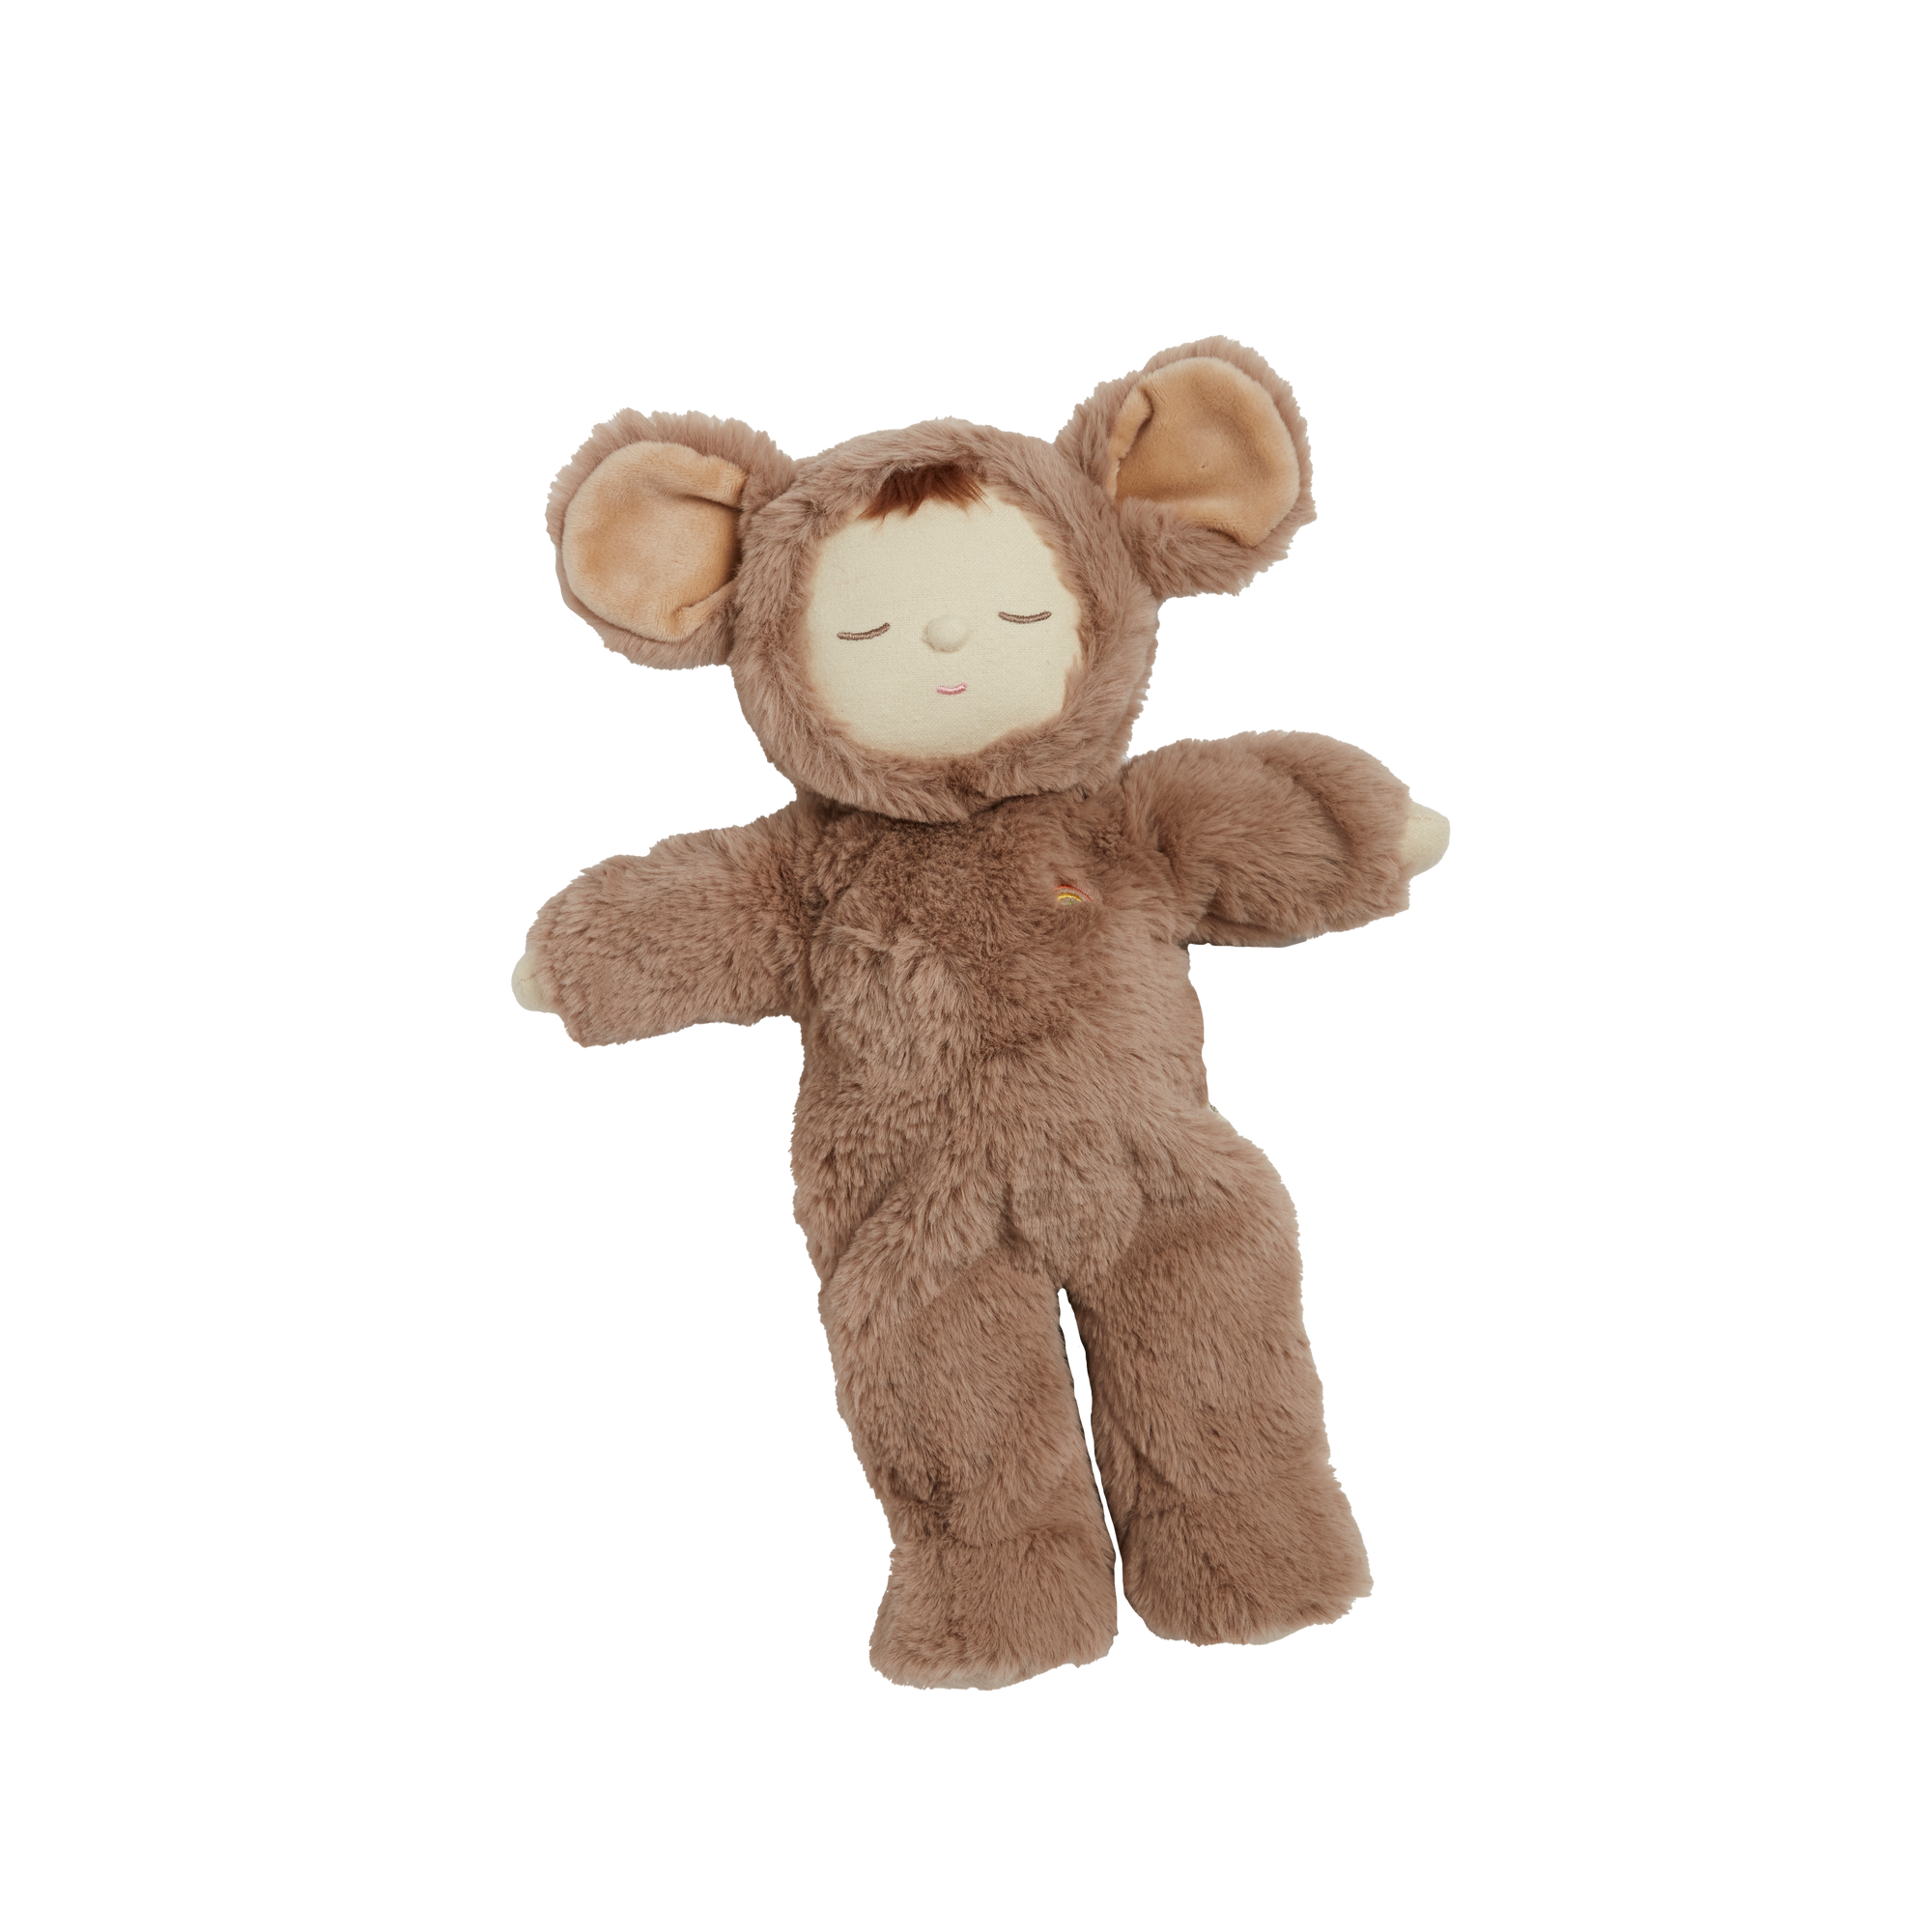 Mousy Pickle, so cuddly and cute, loves to doze in its soft fluffy suit. Made for snuggles and snoozy days, this velvety little Cozy loves to play! 